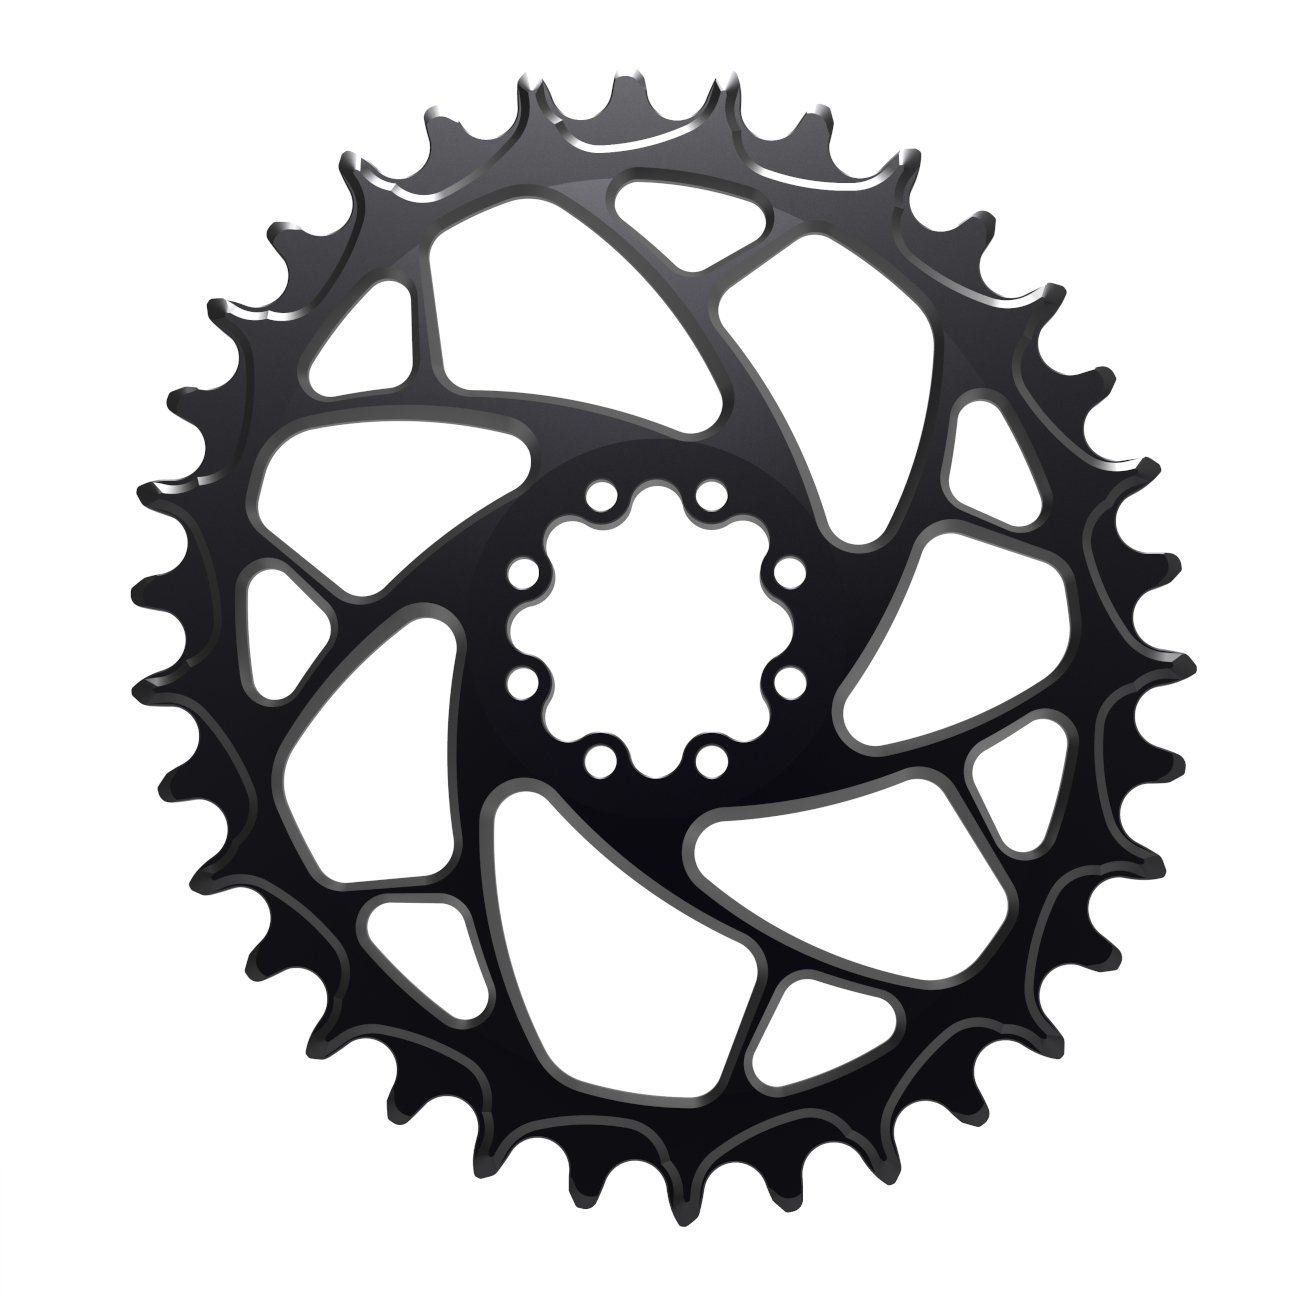 Productfoto van Alugear ELM Narrow Wide Boost MTB Chainring - Oval - for 1x SRAM 8-Bolt Direct Mount